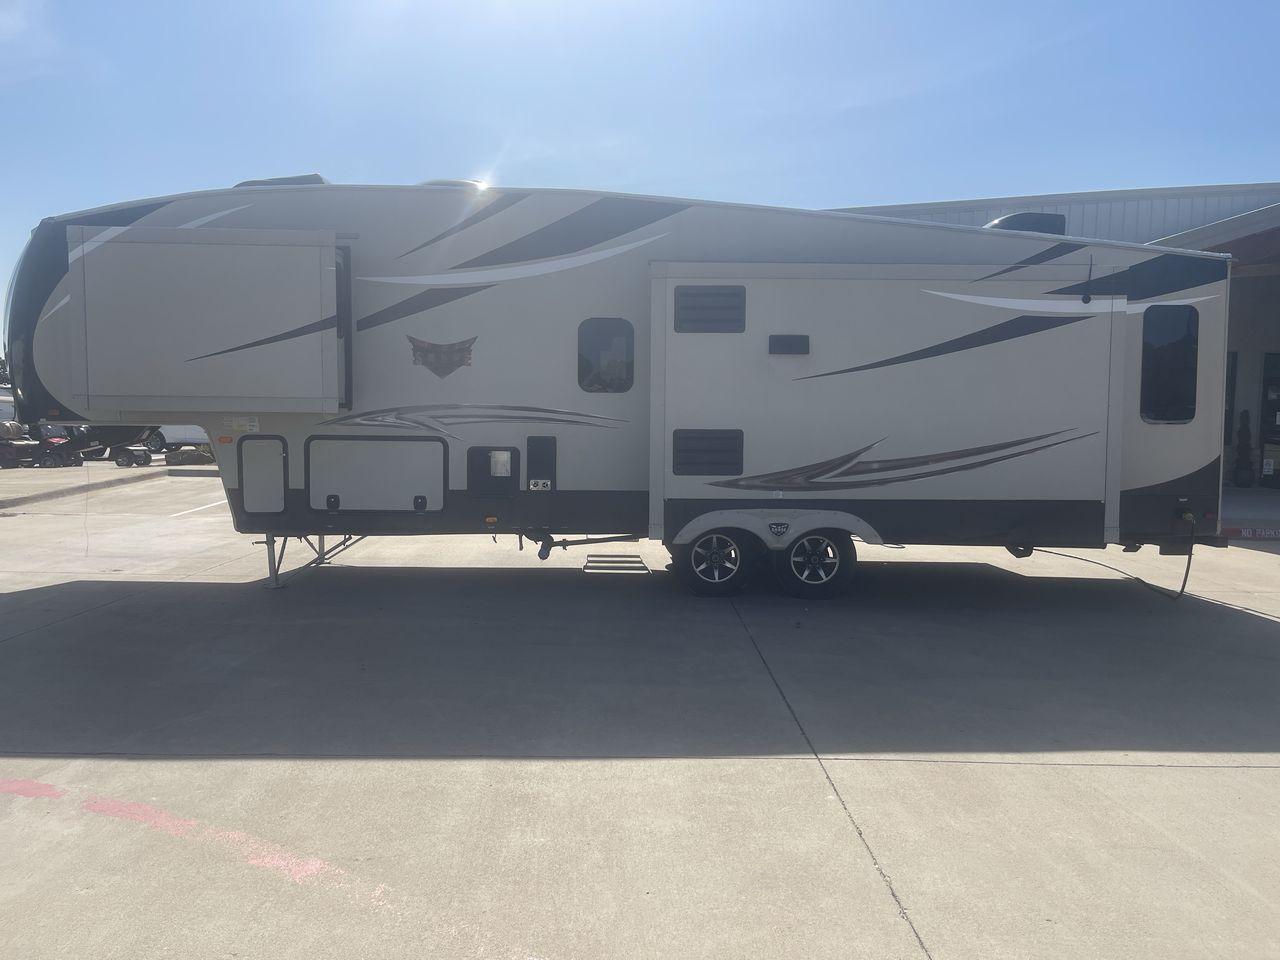 2016 BEIGE FOREST RIVER SABRE 330CK (4X4FSRJ2XG3) , Length: 36.83 ft. | Dry Weight:10,309 lbs. | Gross Weight: 13,870 lbs. | Slides: 3 transmission, located at 4319 N Main Street, Cleburne, TX, 76033, (817) 221-0660, 32.435829, -97.384178 - With a roomy cabin and well-thought-out design, the 2016 Forest River Sabre 330CK Fifth Wheel is a high-end camping trailer. It's 36.83 feet long and weighs 10,309 pounds when it's dry, which is a great size and weight for what it does. With three slides, there is plenty of room for you to relax and - Photo #24